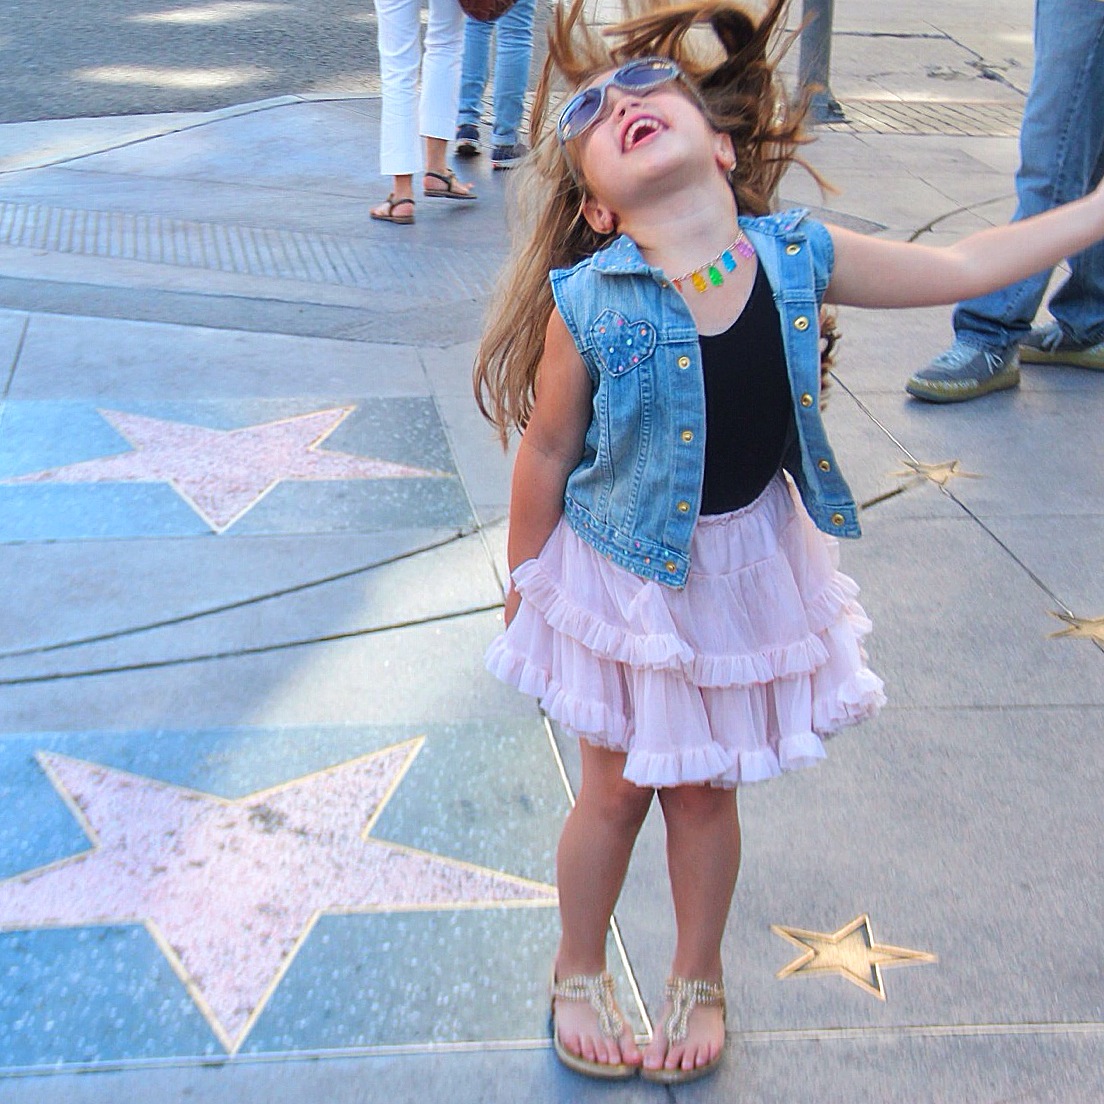 A little girl on the Hollywood walk of fame